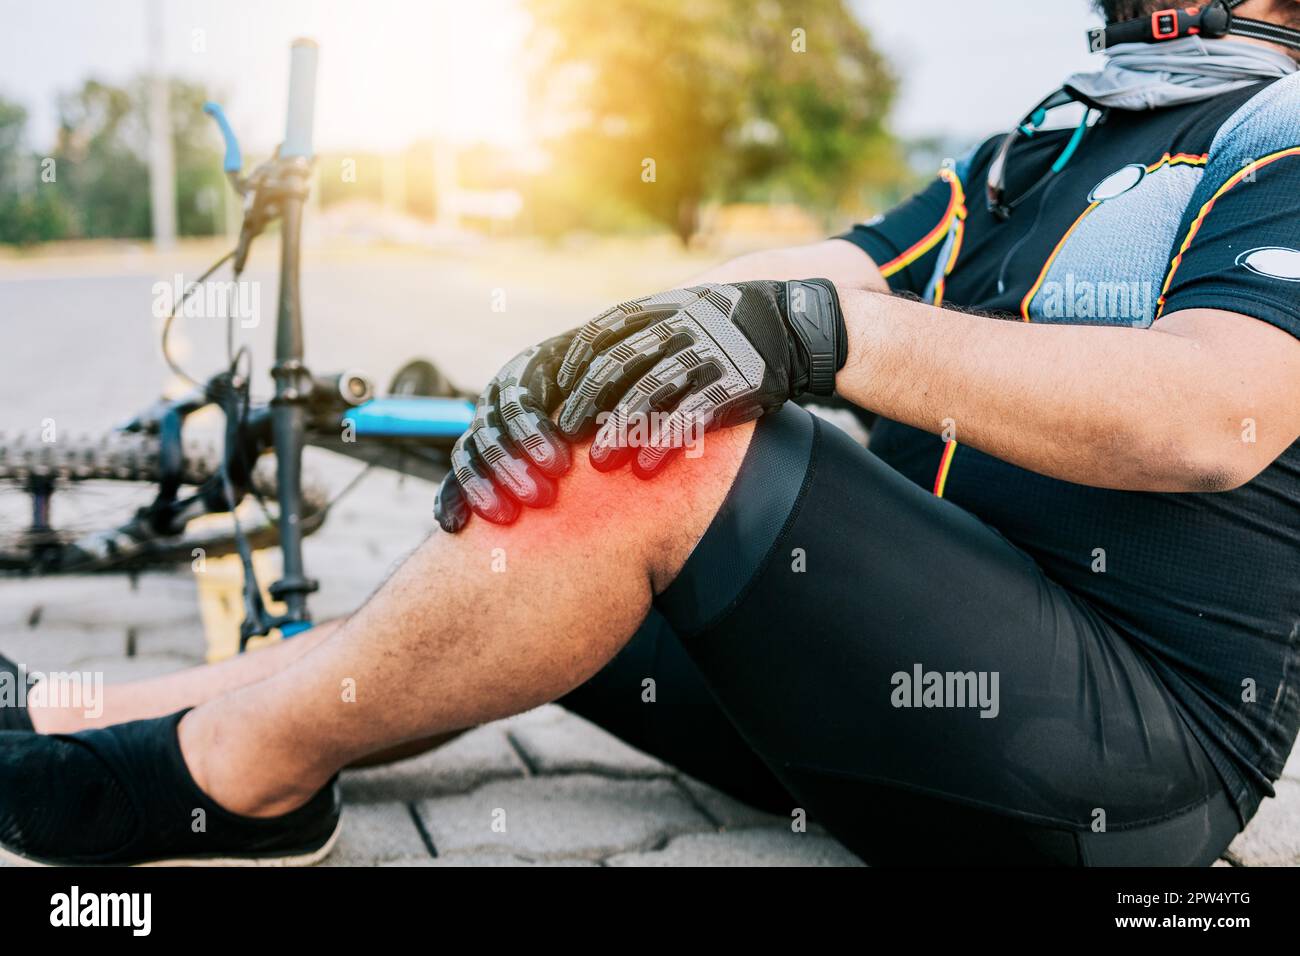 Concept of cyclist with knee injury outdoors. Cyclist with knee pain outdoors. Male cyclist sitting on the pavement with knee pain Stock Photo